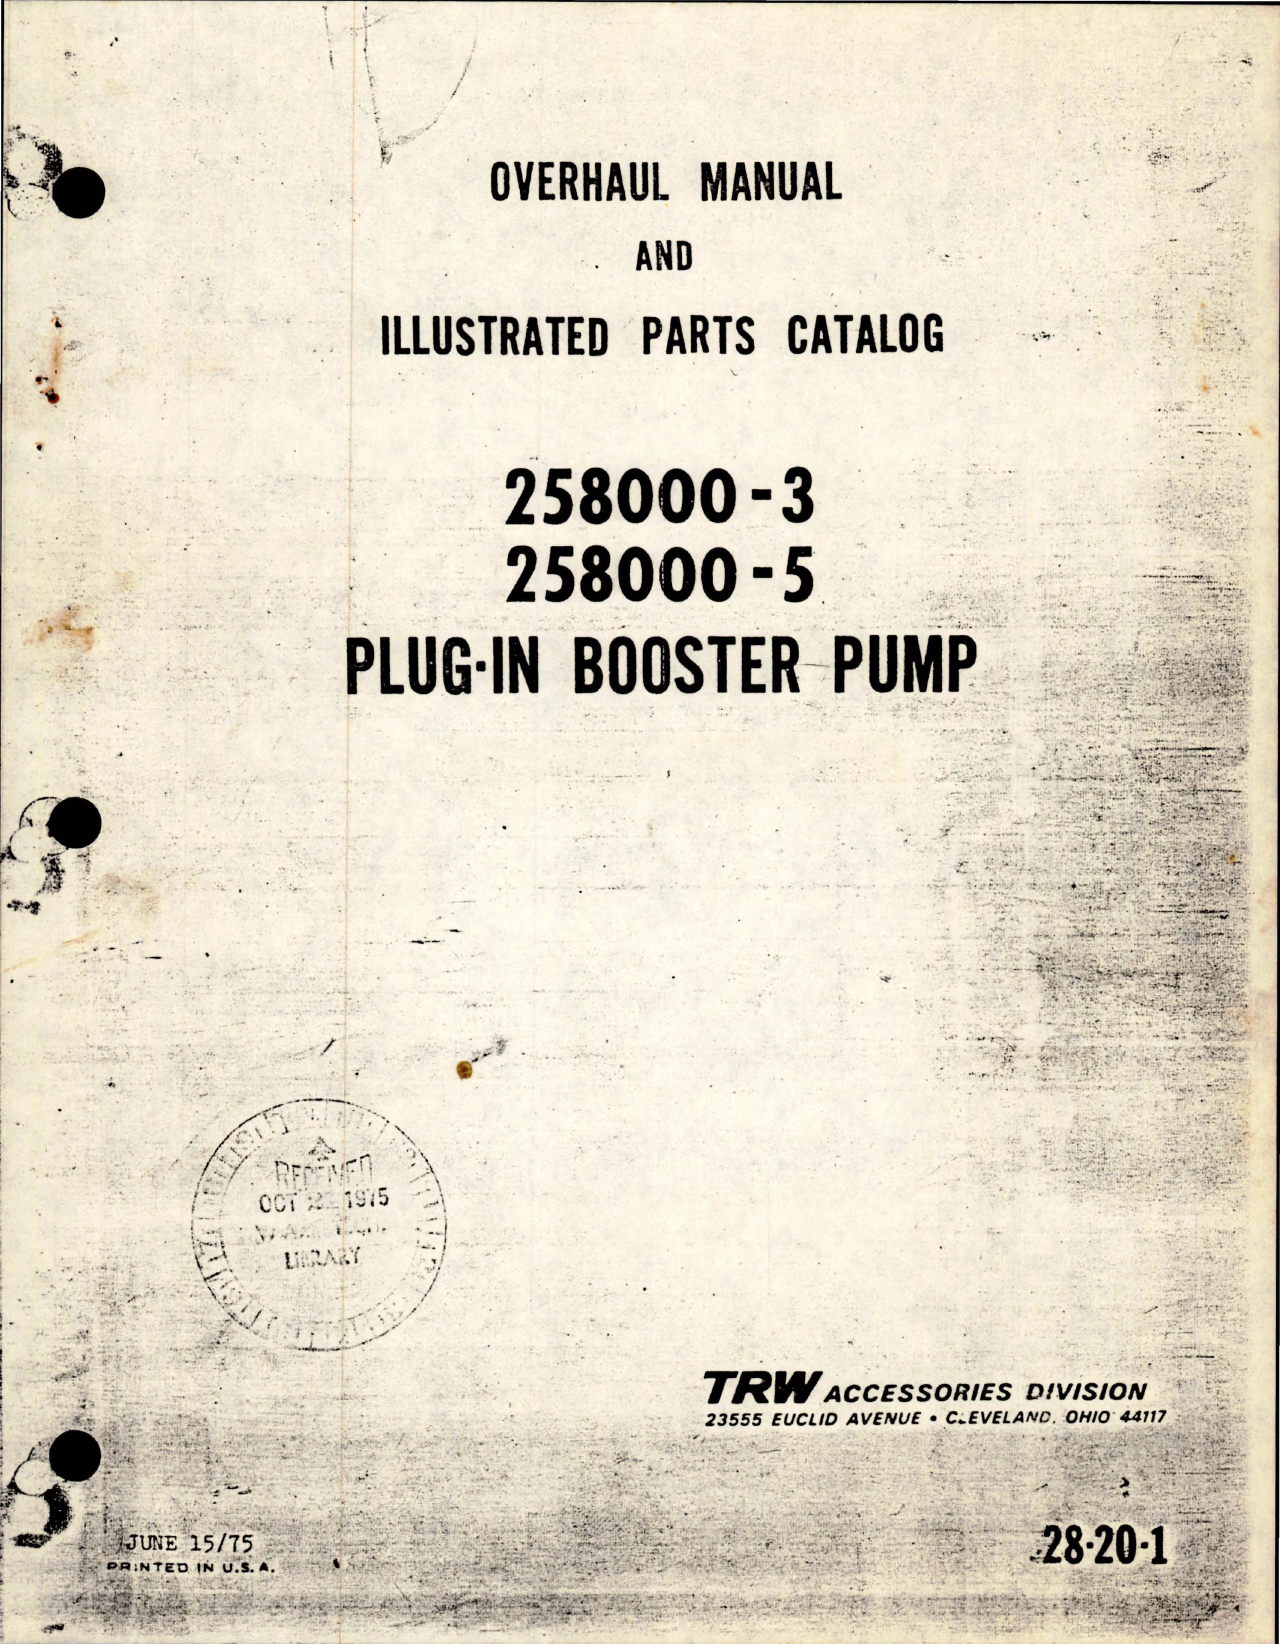 Sample page 1 from AirCorps Library document: Overhaul Instructions with Illustrated Parts Catalog for Plug In Booster Pump - 258000-3 and 258000-5